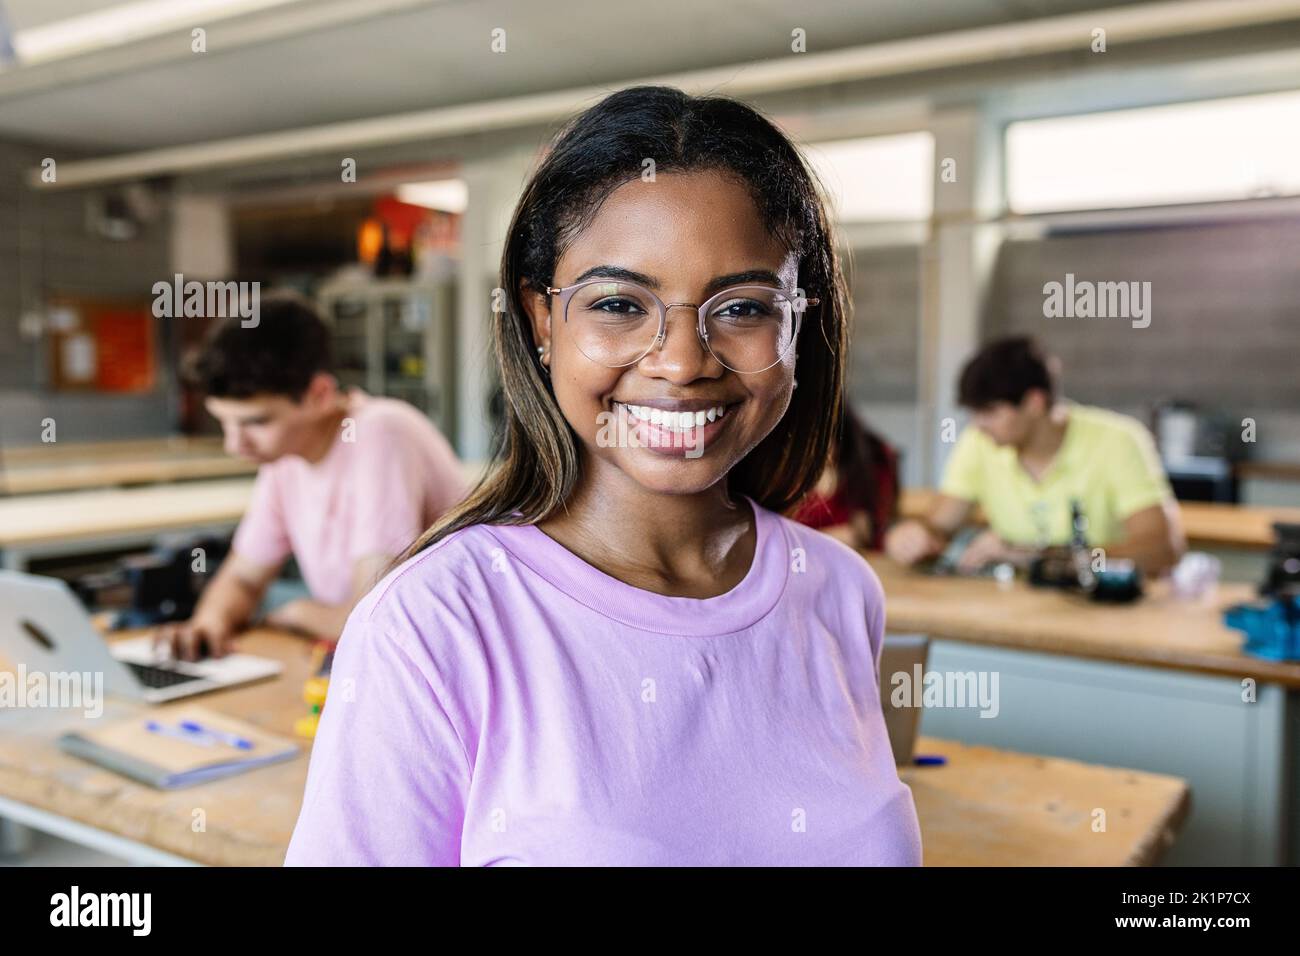 Portrait of young latin student woman smiling at camera standing at classroom Stock Photo